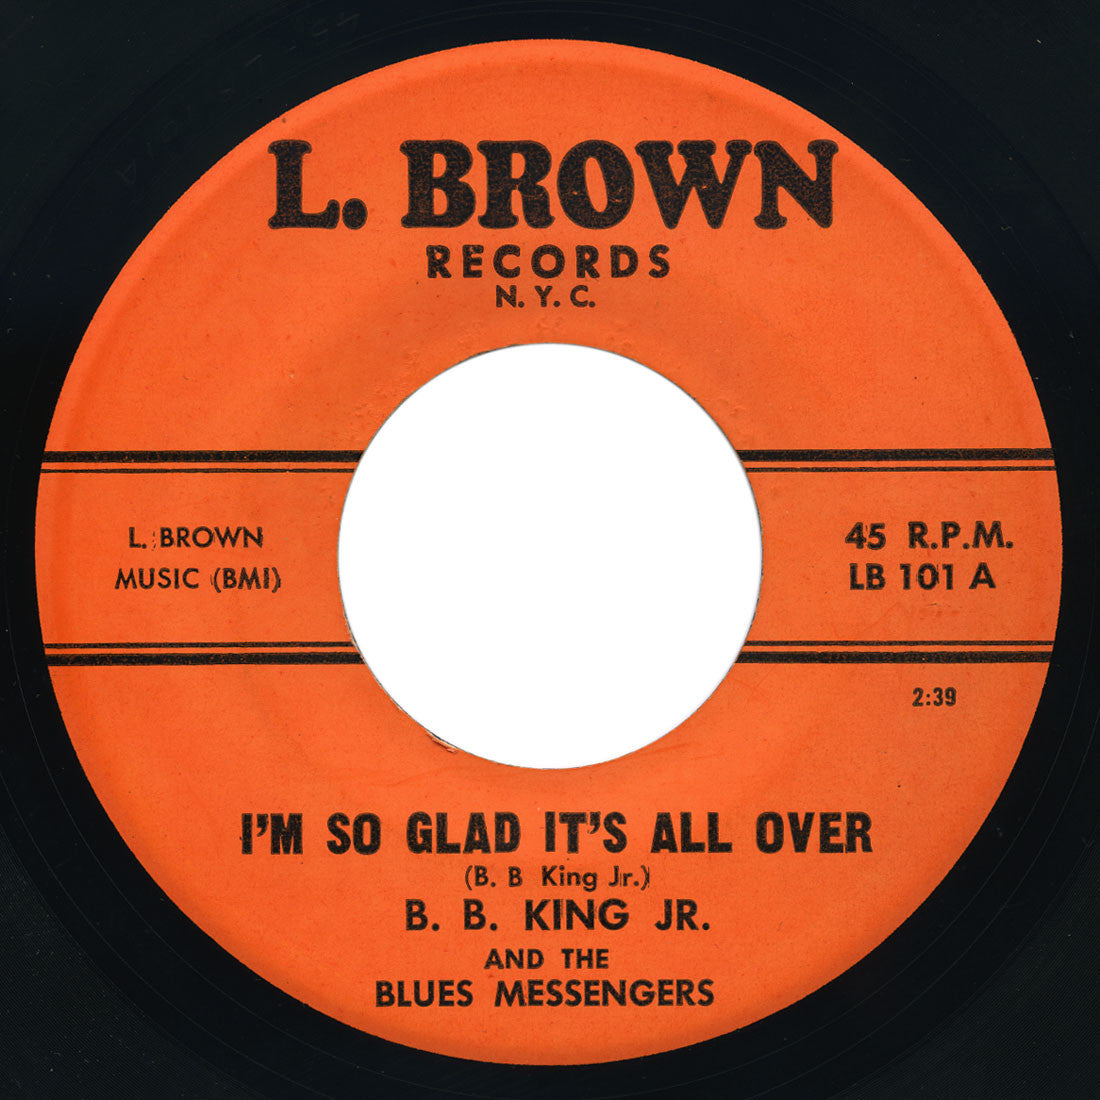 B.B. King Jr. And The Blues Messengers – I’m So Glad It’s All Over